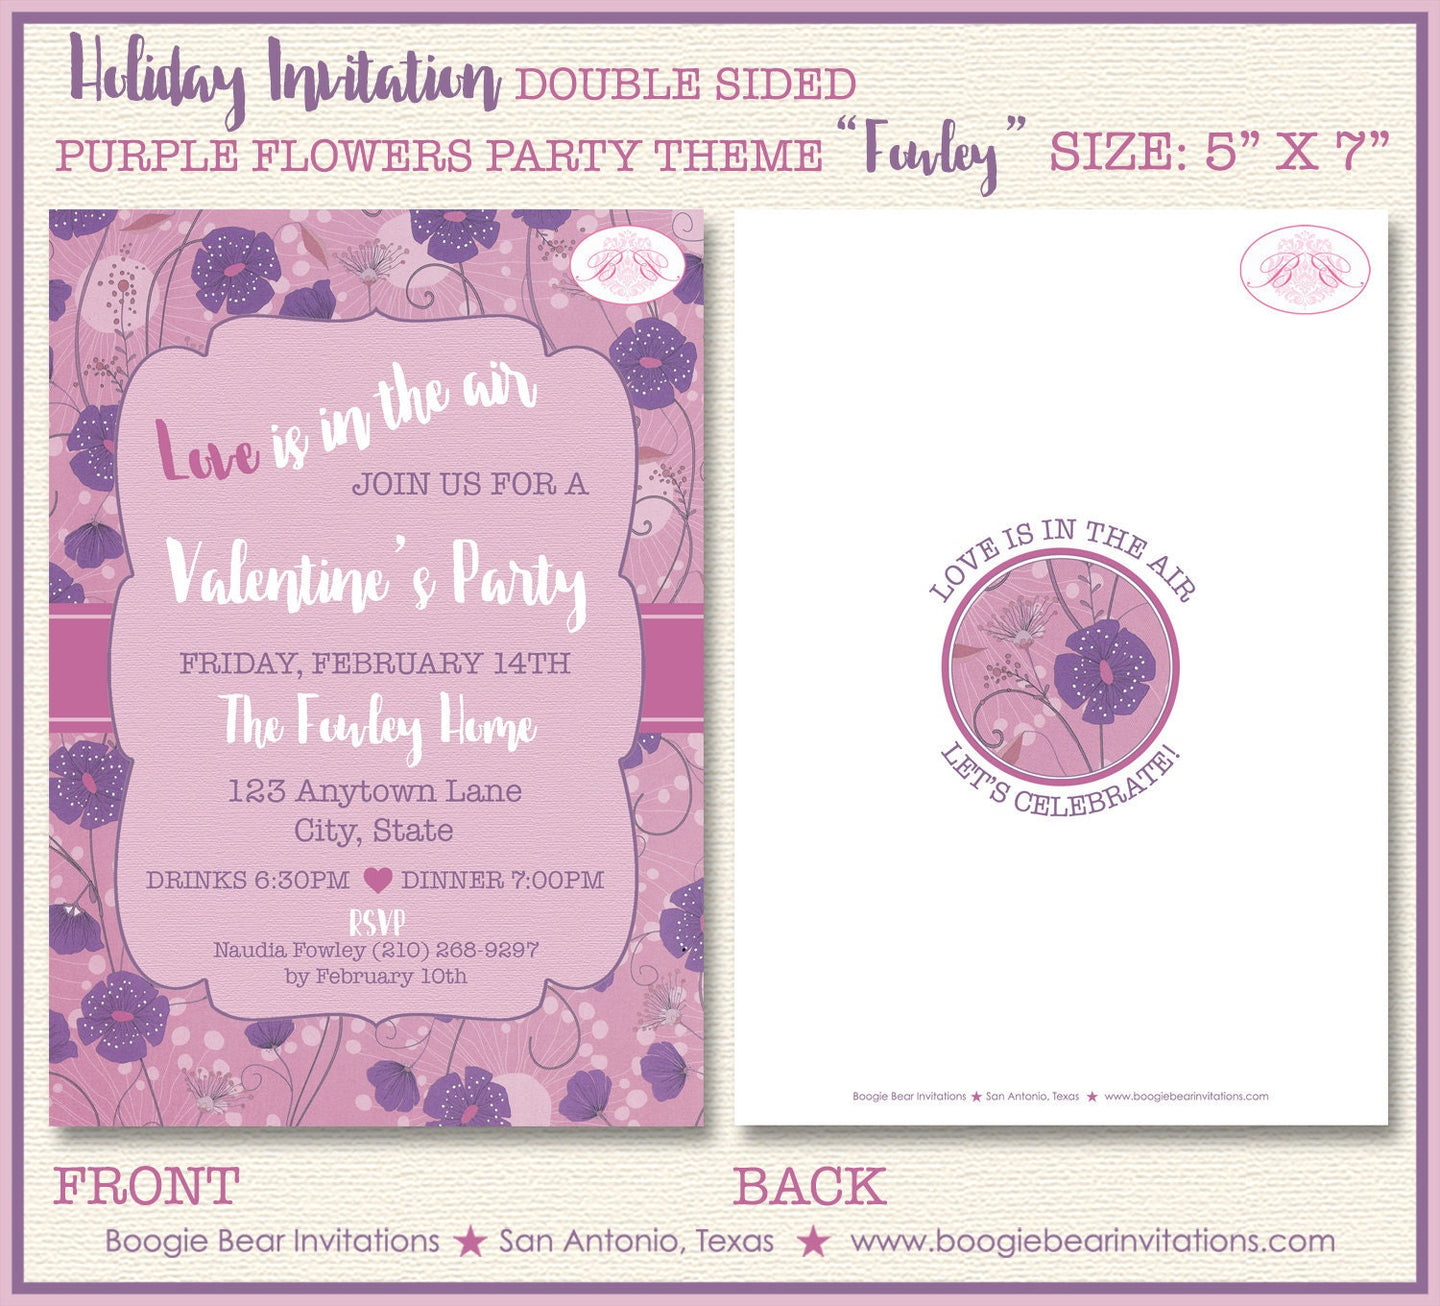 Lavender Flowers Valentine's Day Invitation Party Pink Purple Flower Garden Boogie Bear Invitations Fowley Theme Paperless Printable Printed